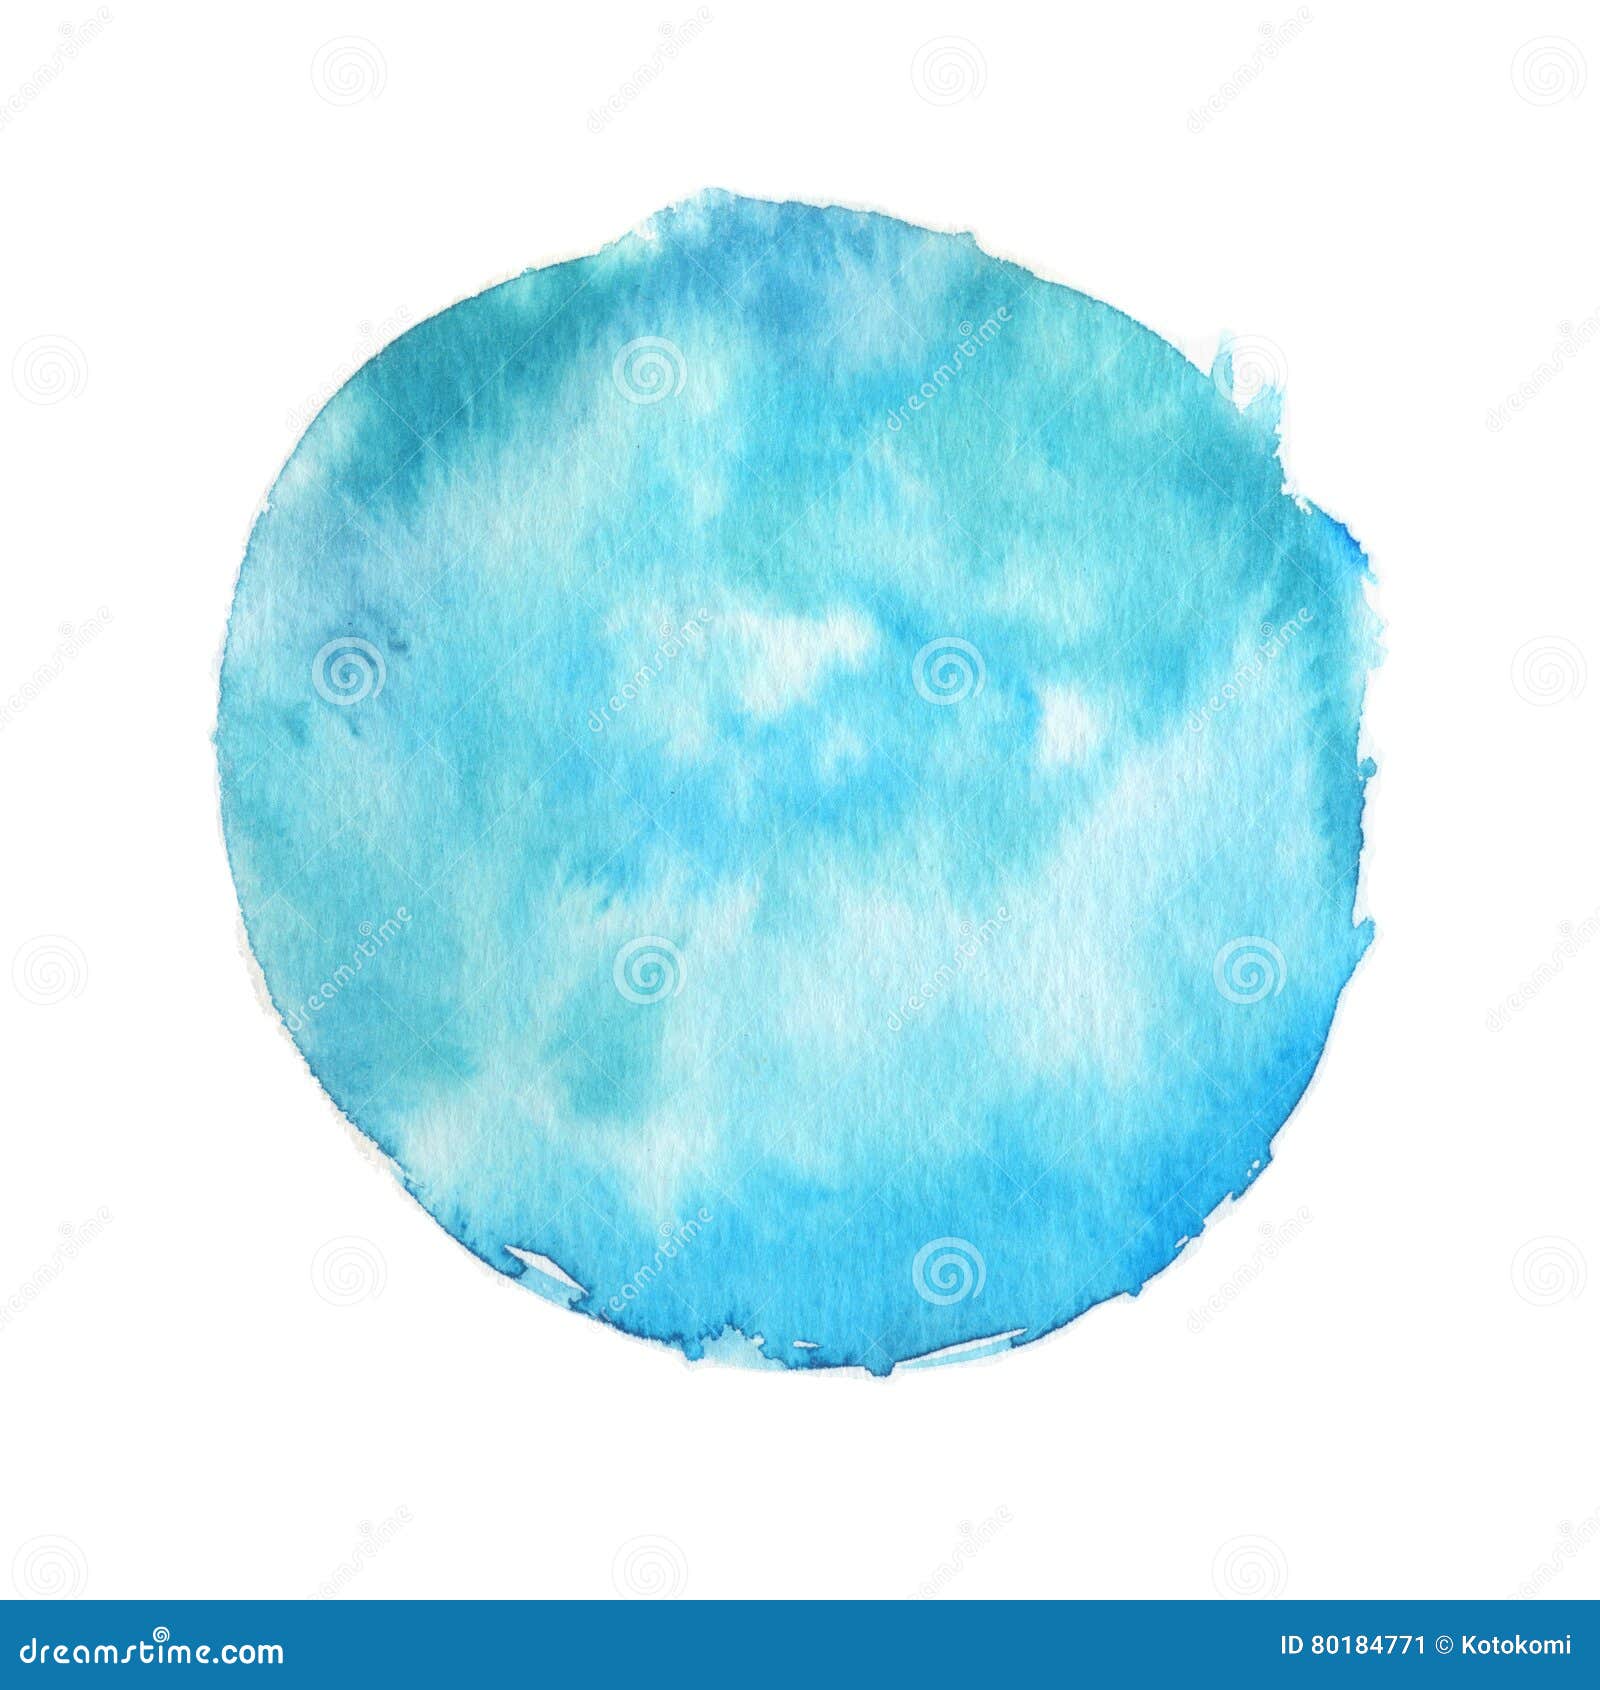 large watercolor stain with paint texture  on white background. saturated turquoise color. hand drawn backdrop